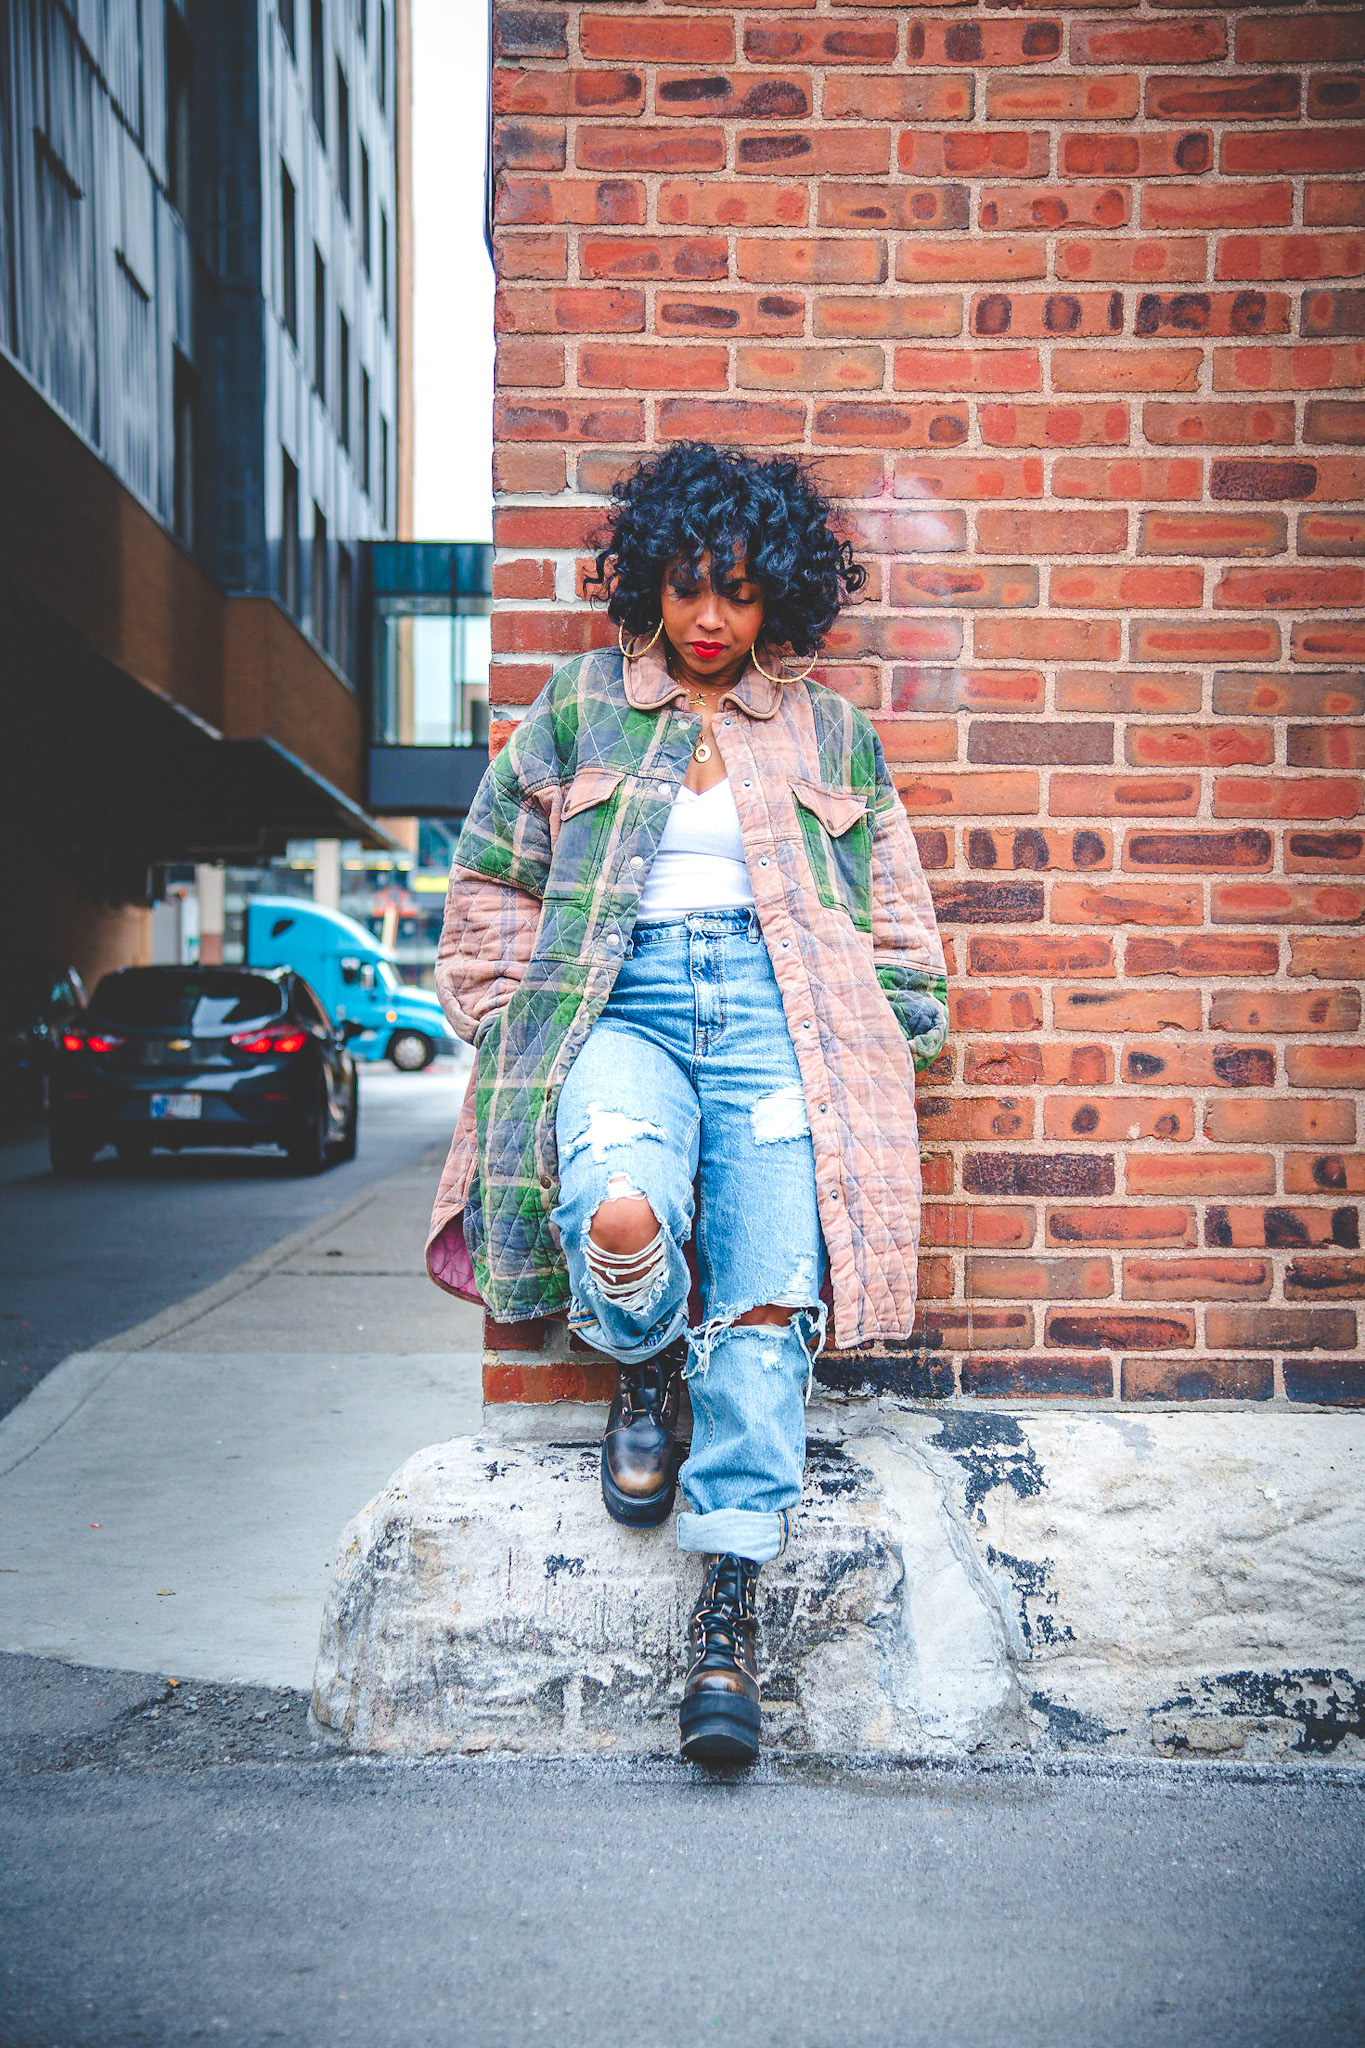 FREE PEOPLE, SWEENEE STYLE, FREE PEOPLE DENIM, DR MARTENS, NATURAL HAIR, INDIANAPOLIS FASHION BLOG, BLACK GIRLS WHO BLOG, EASY OUTFIT IDEAS, WINTER